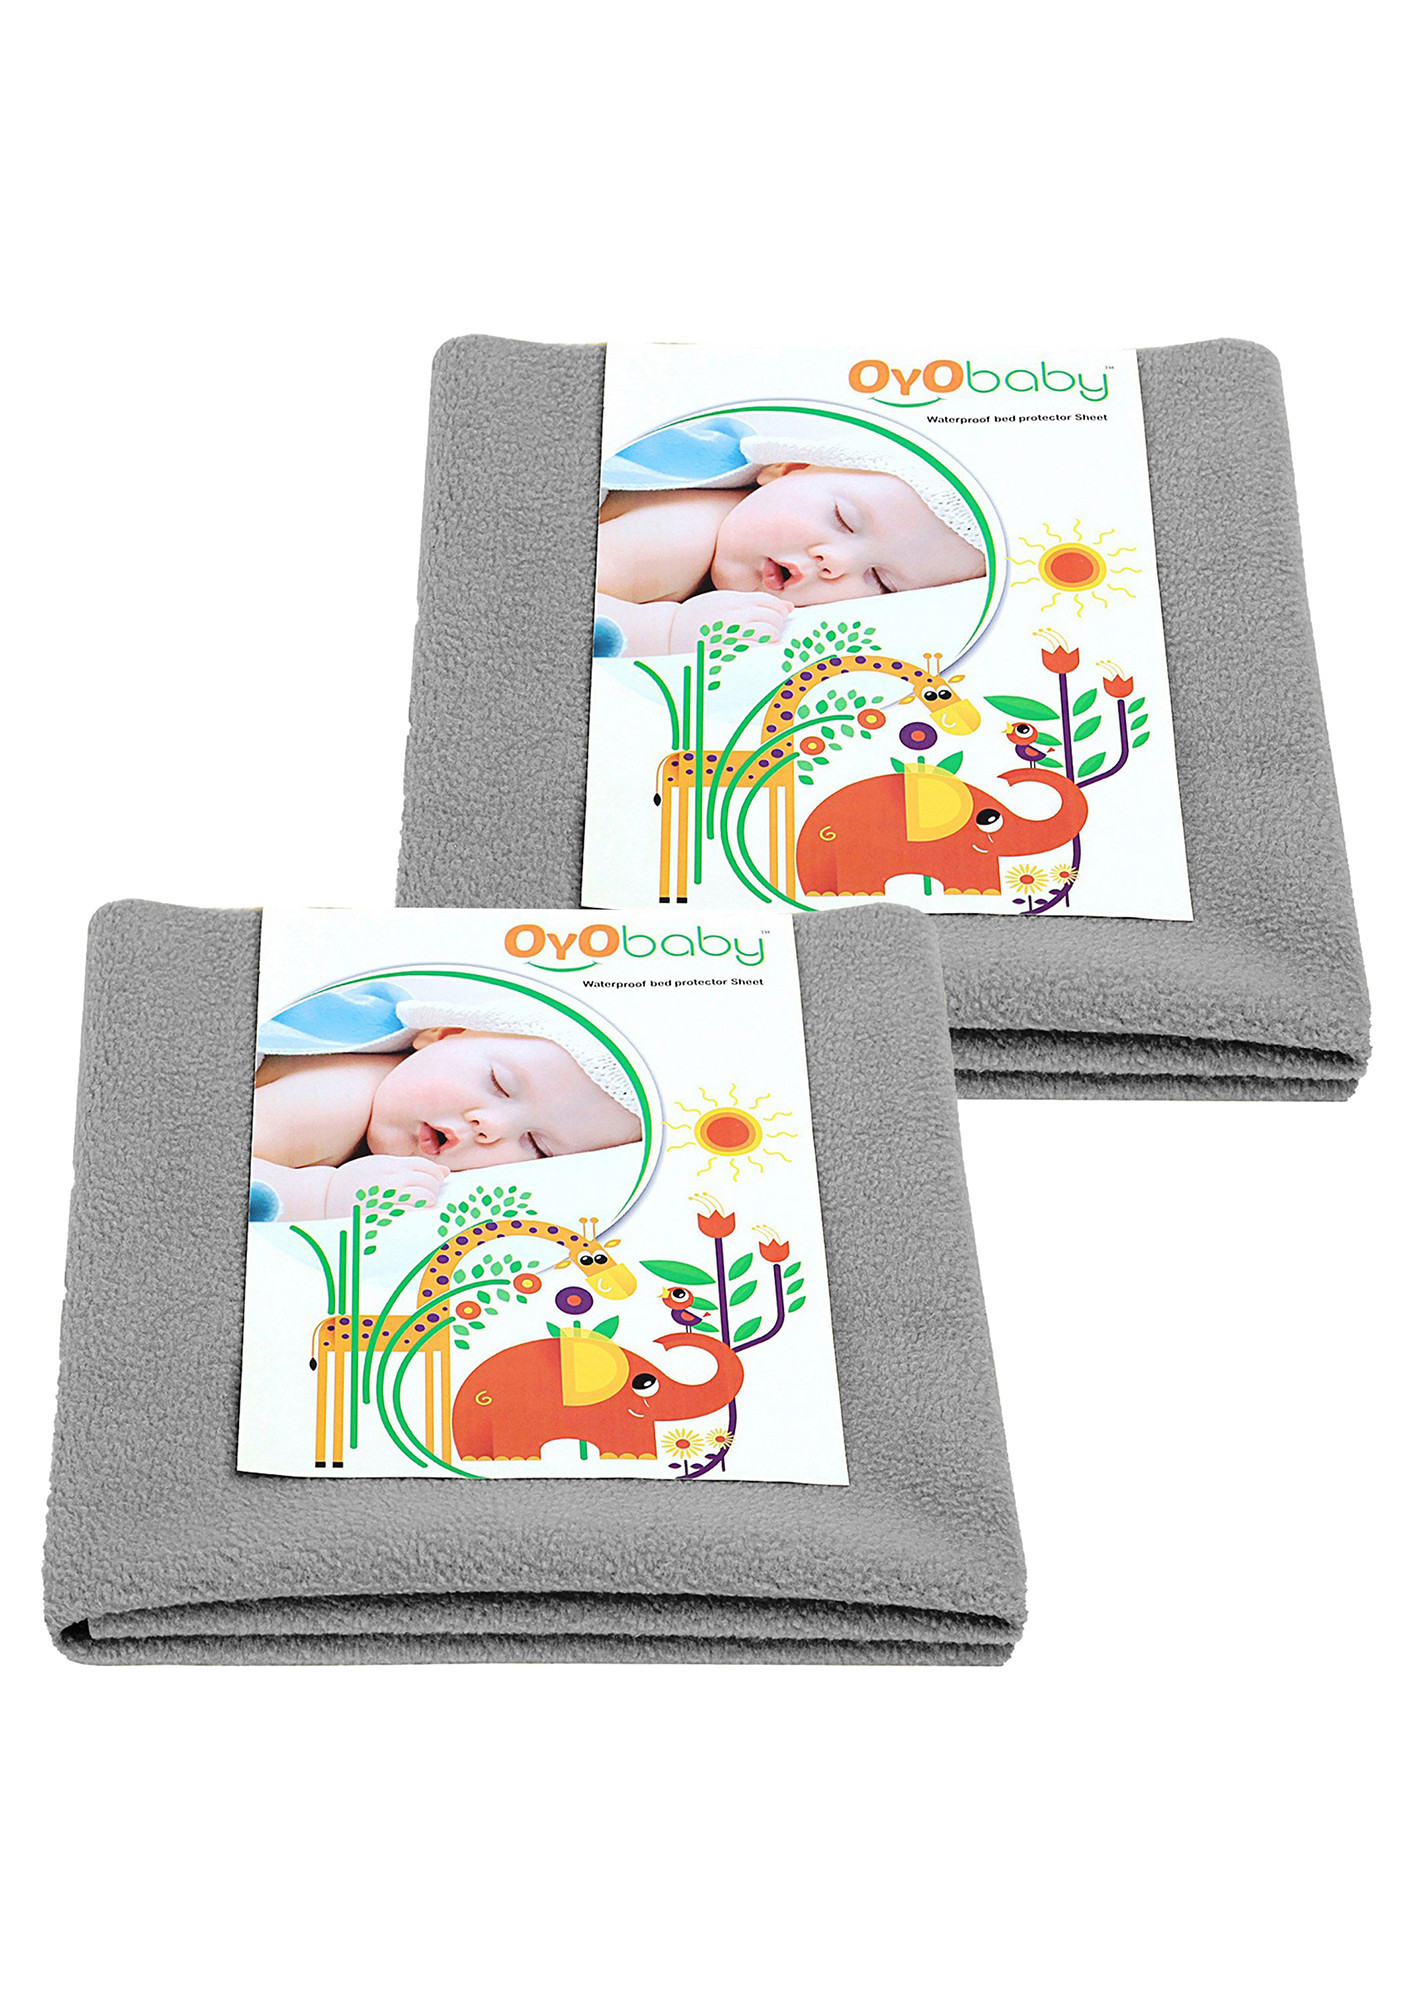 Oyo Baby Cotton Baby Bed Protecting Mat (Grey, Large, Pack of 2)-OB-2027-GR